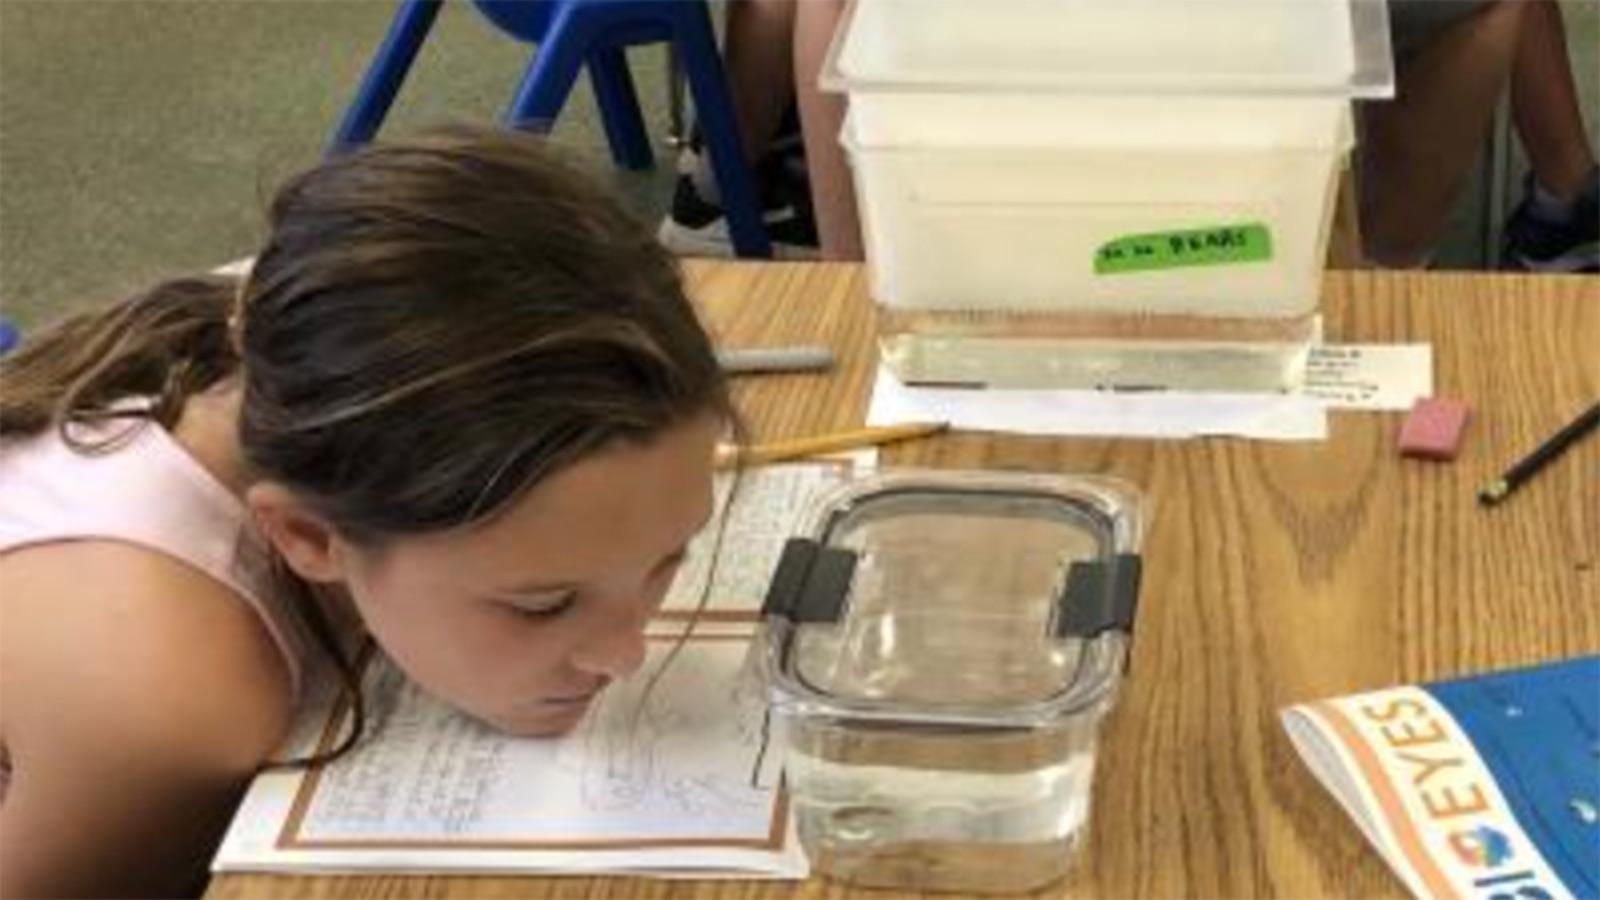 Student looking at zebrafish in container